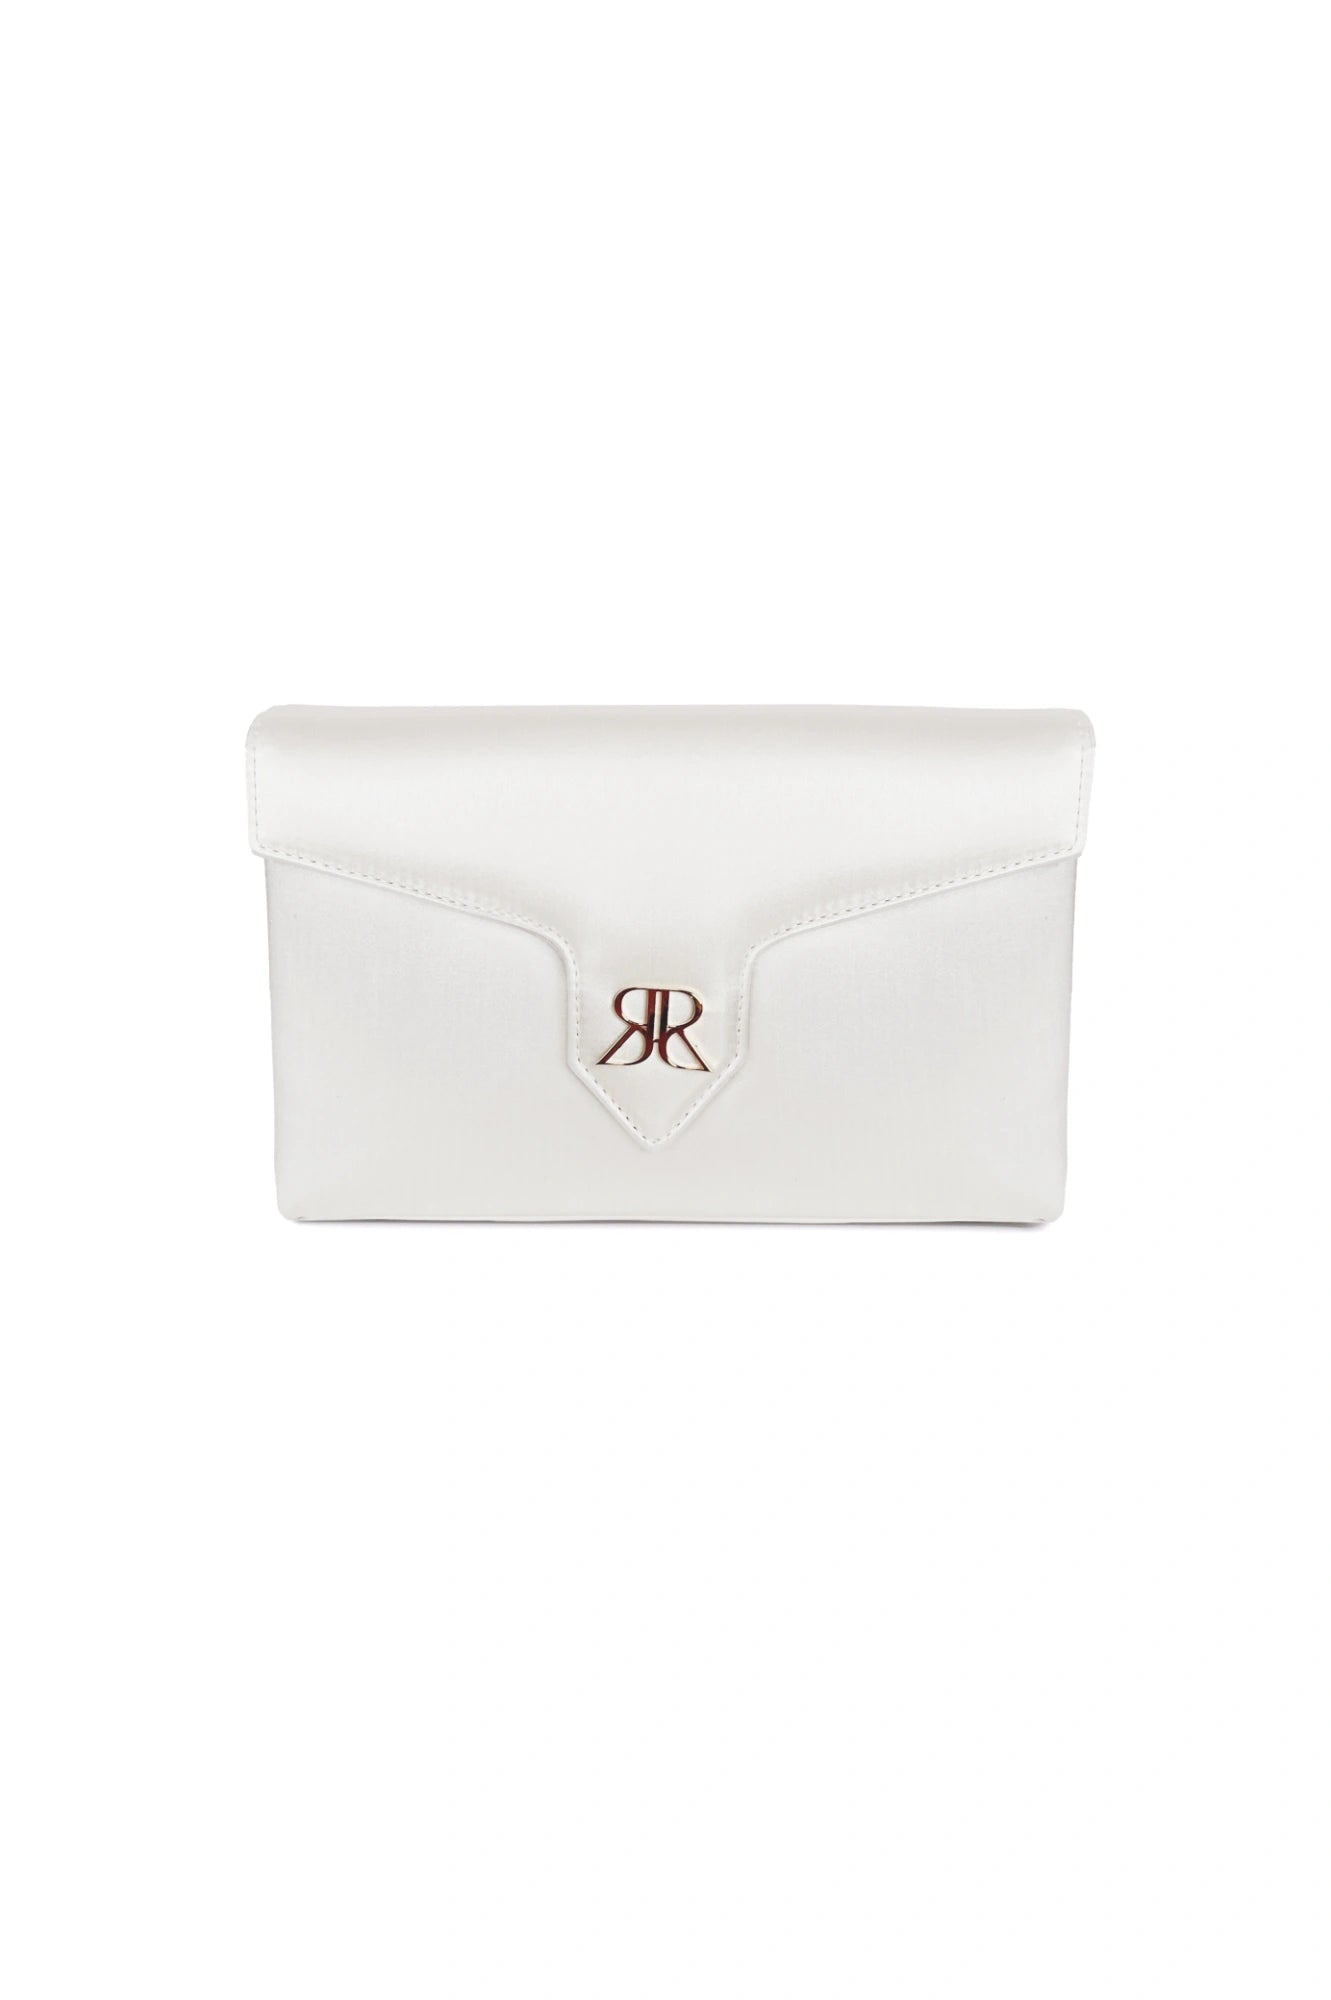 Love Note Envelope Clutch Ivory from The Bella Rosa Collection with monogram logo on flap, crafted from Italian Duchess Satin.